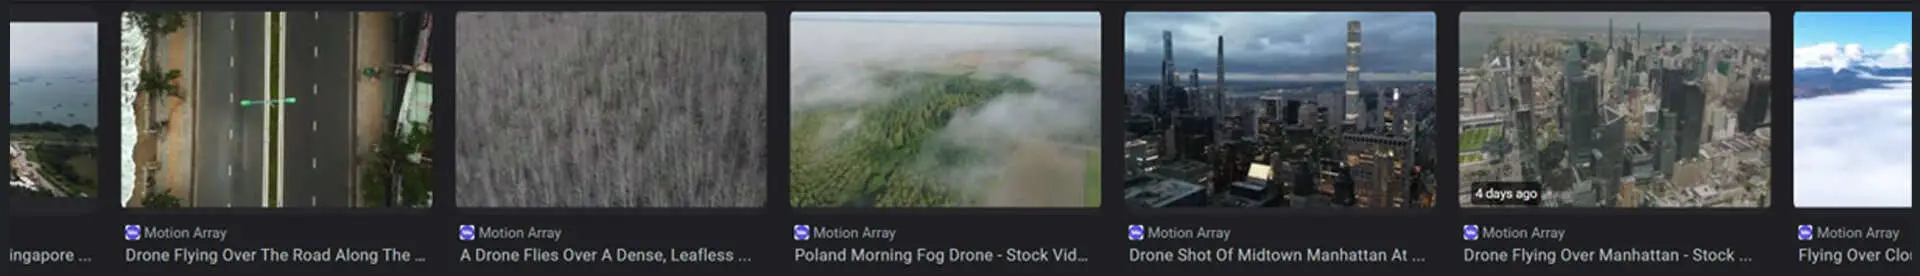 motion array drone stock footage grid